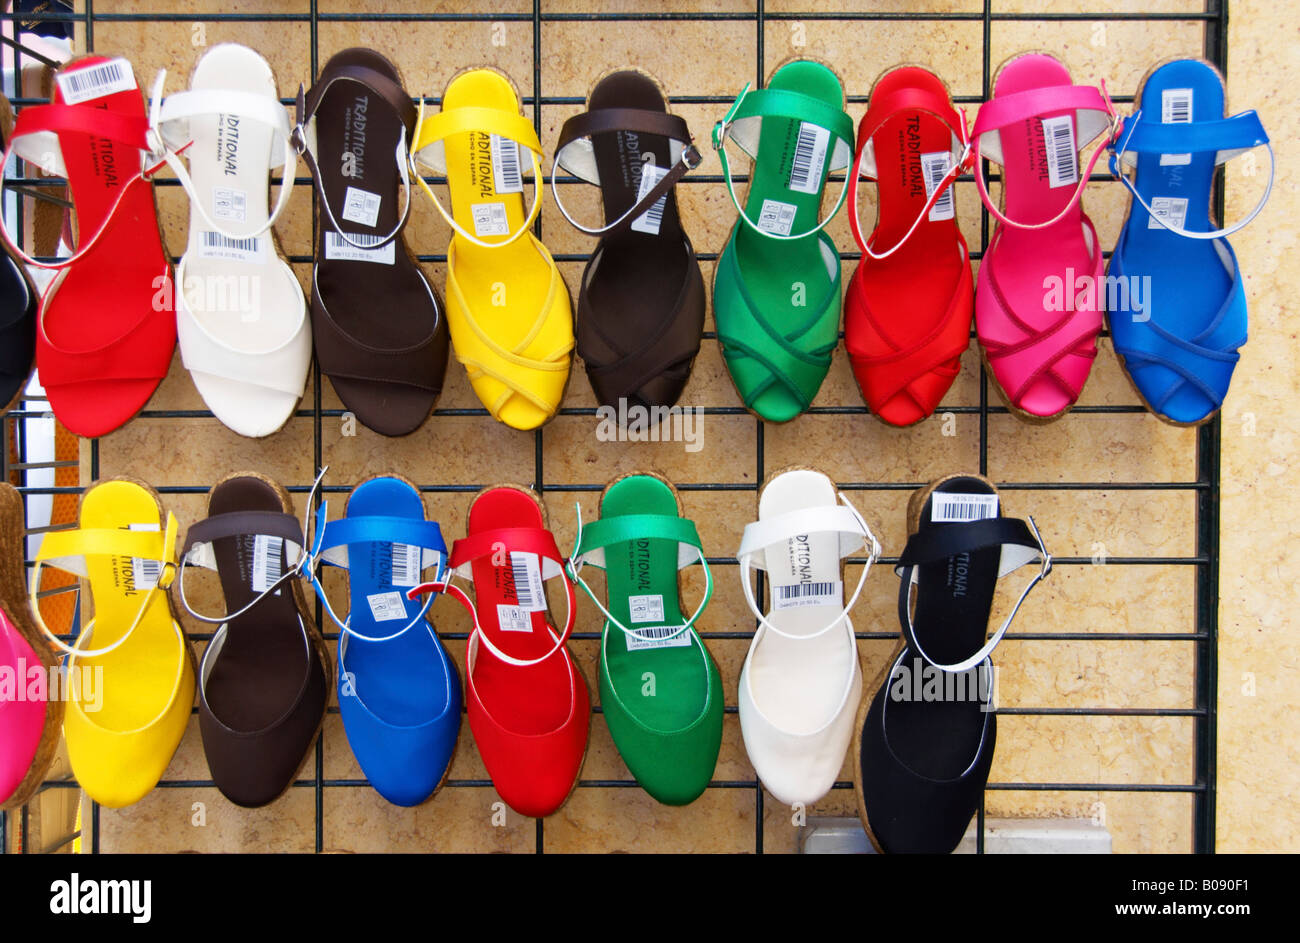 Women's shoes at a shop, shopping street, Seville, Andalusia, Spain Stock Photo